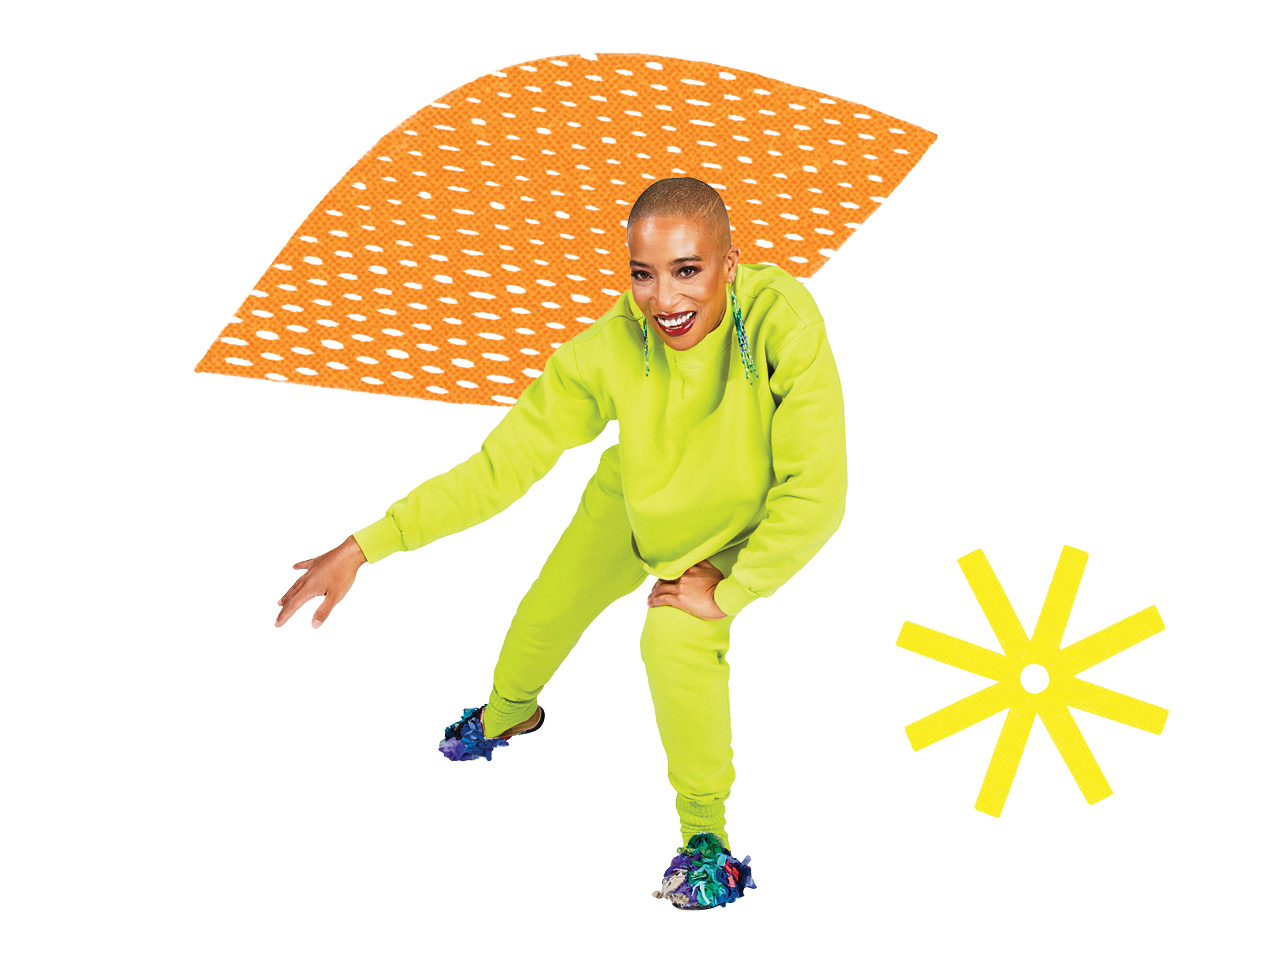 Sweatsuit: Okayok. A woman bending over and swinging her arm, wearing a lime green track suit.